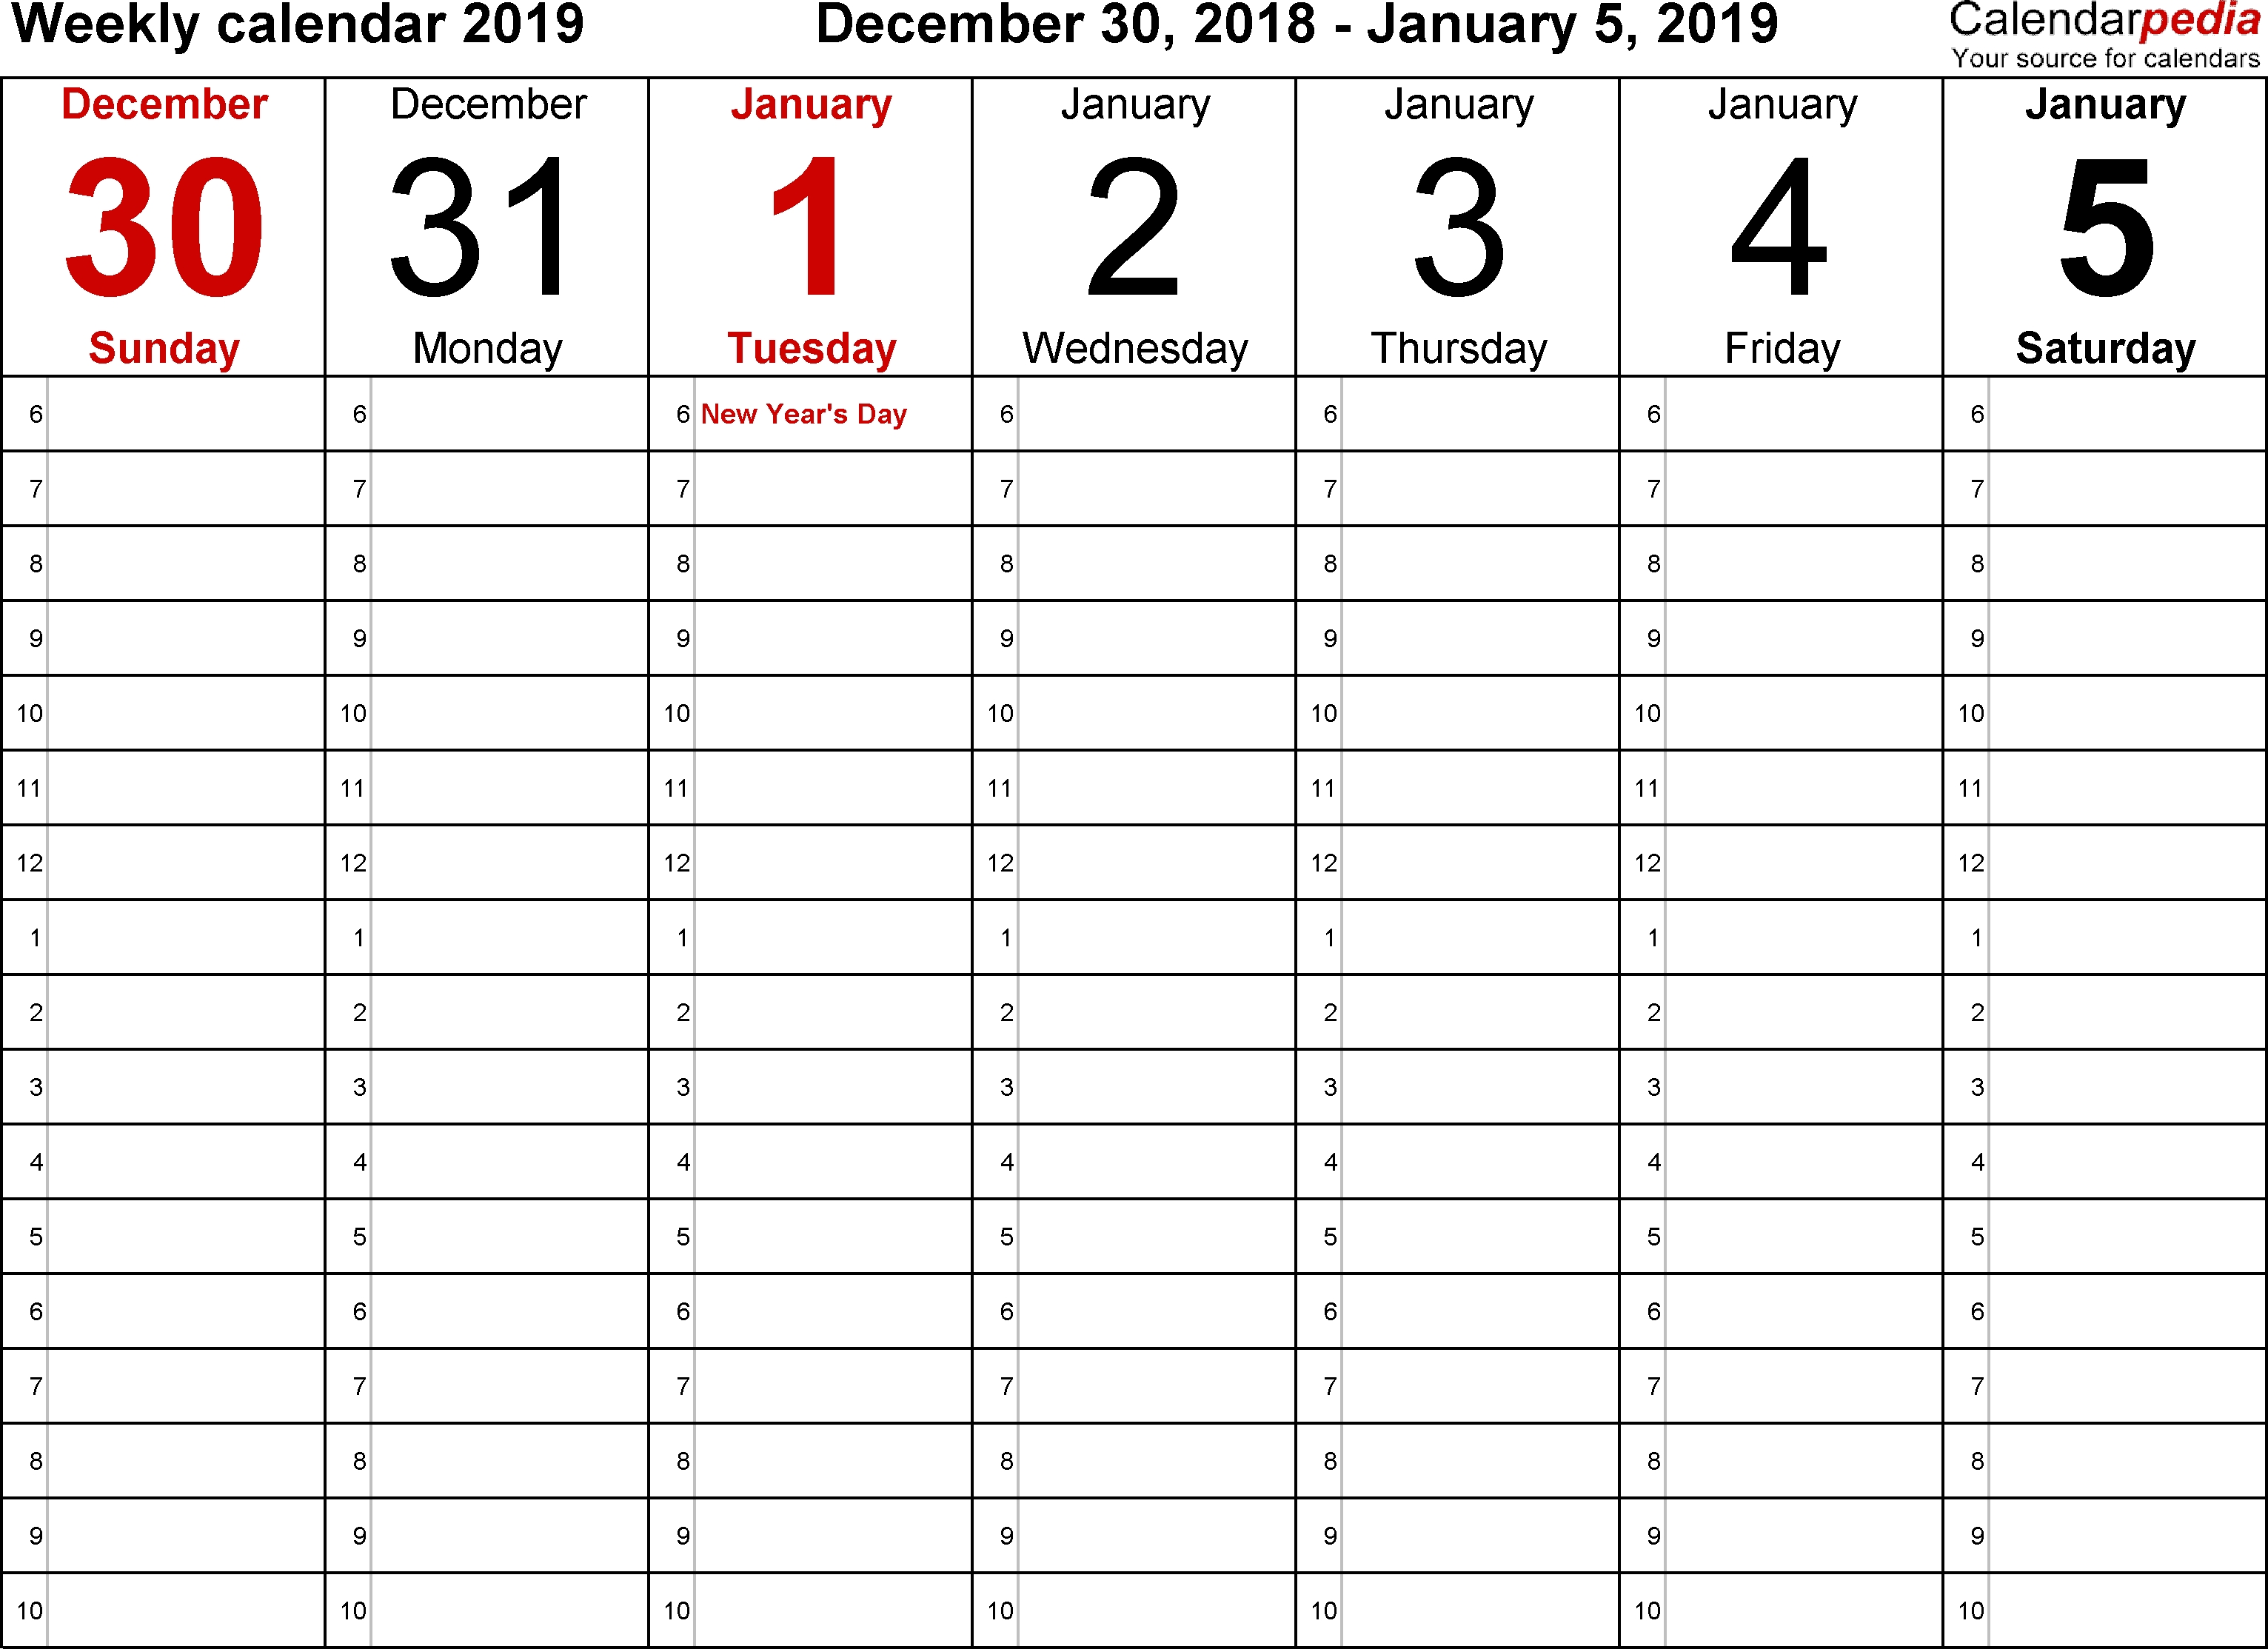 Blank Calendars To Print With Time Slots